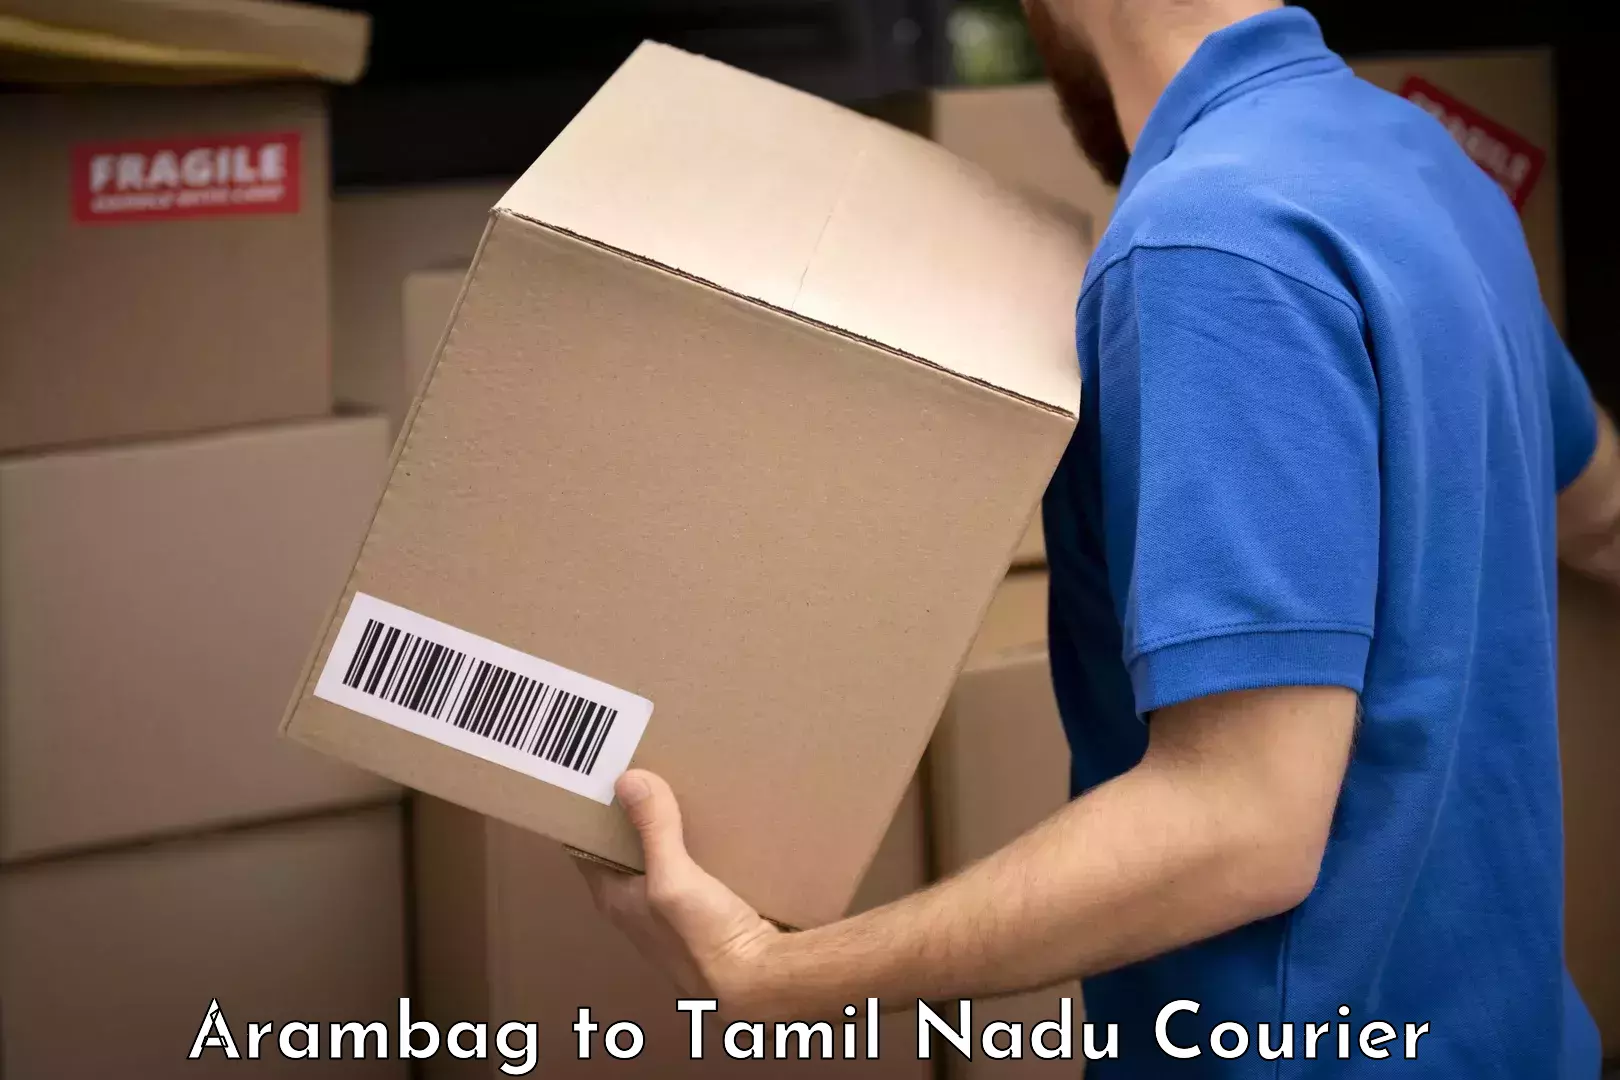 Personal effects shipping Arambag to Memalur